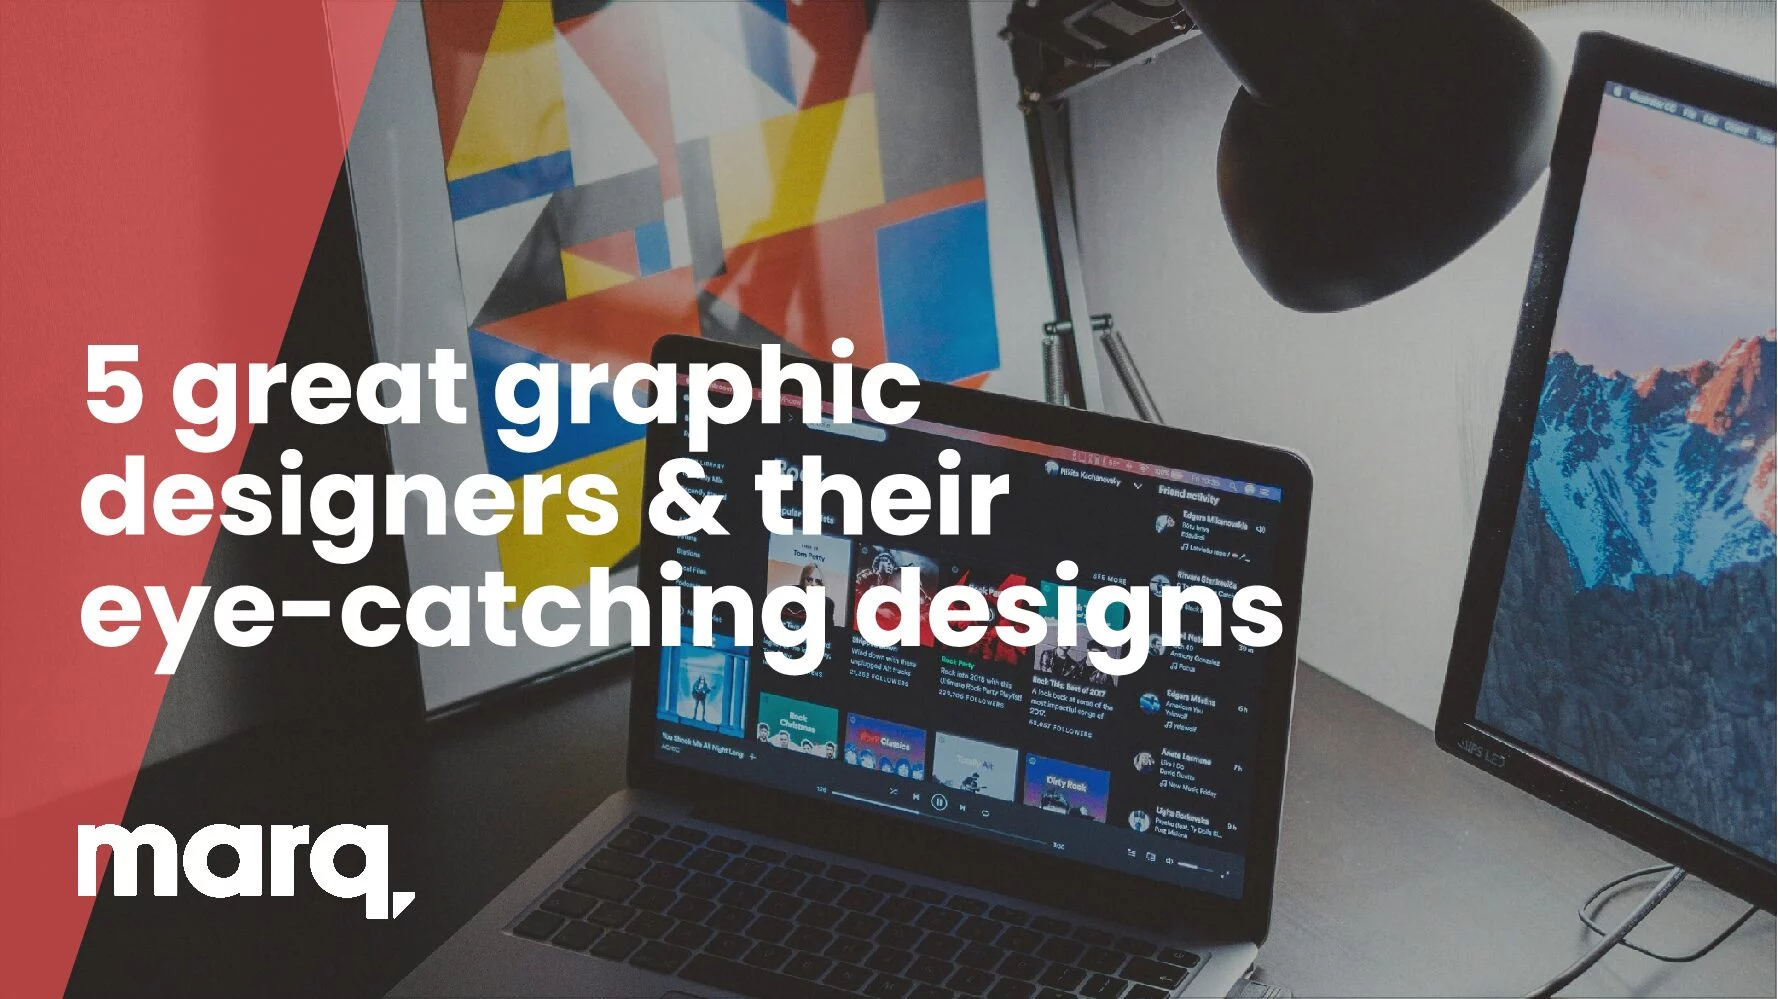 5 great graphic designers & their eye-catching designs